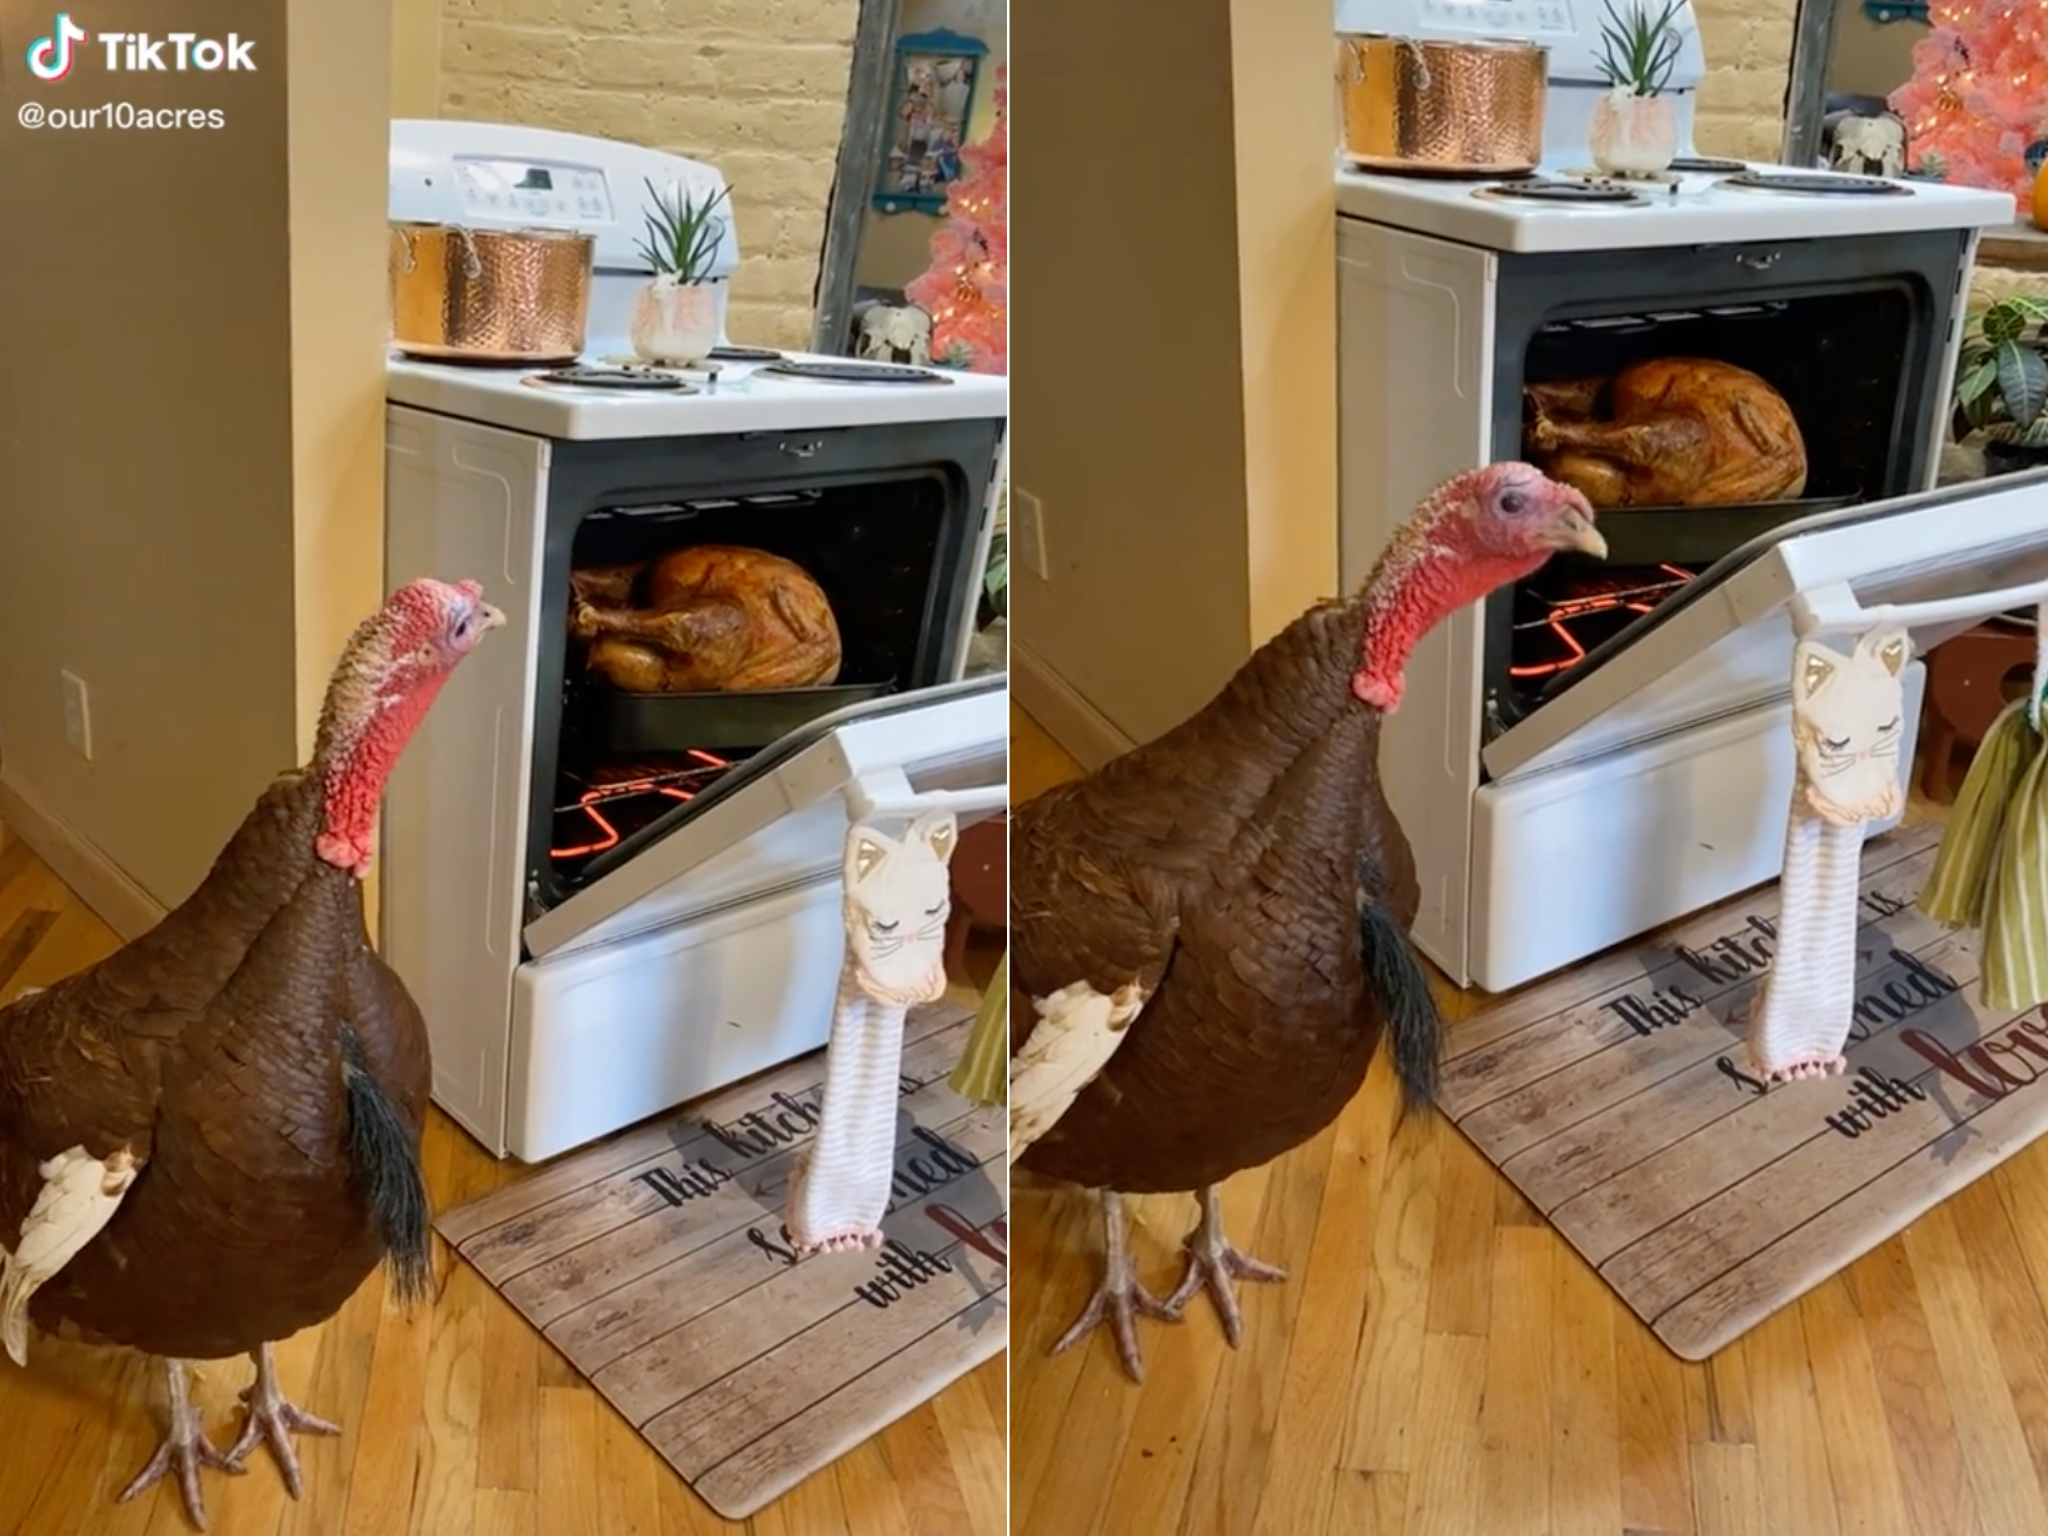 Viral TikTok of an alive turkey next to one in a baking dish sparks huge backlash